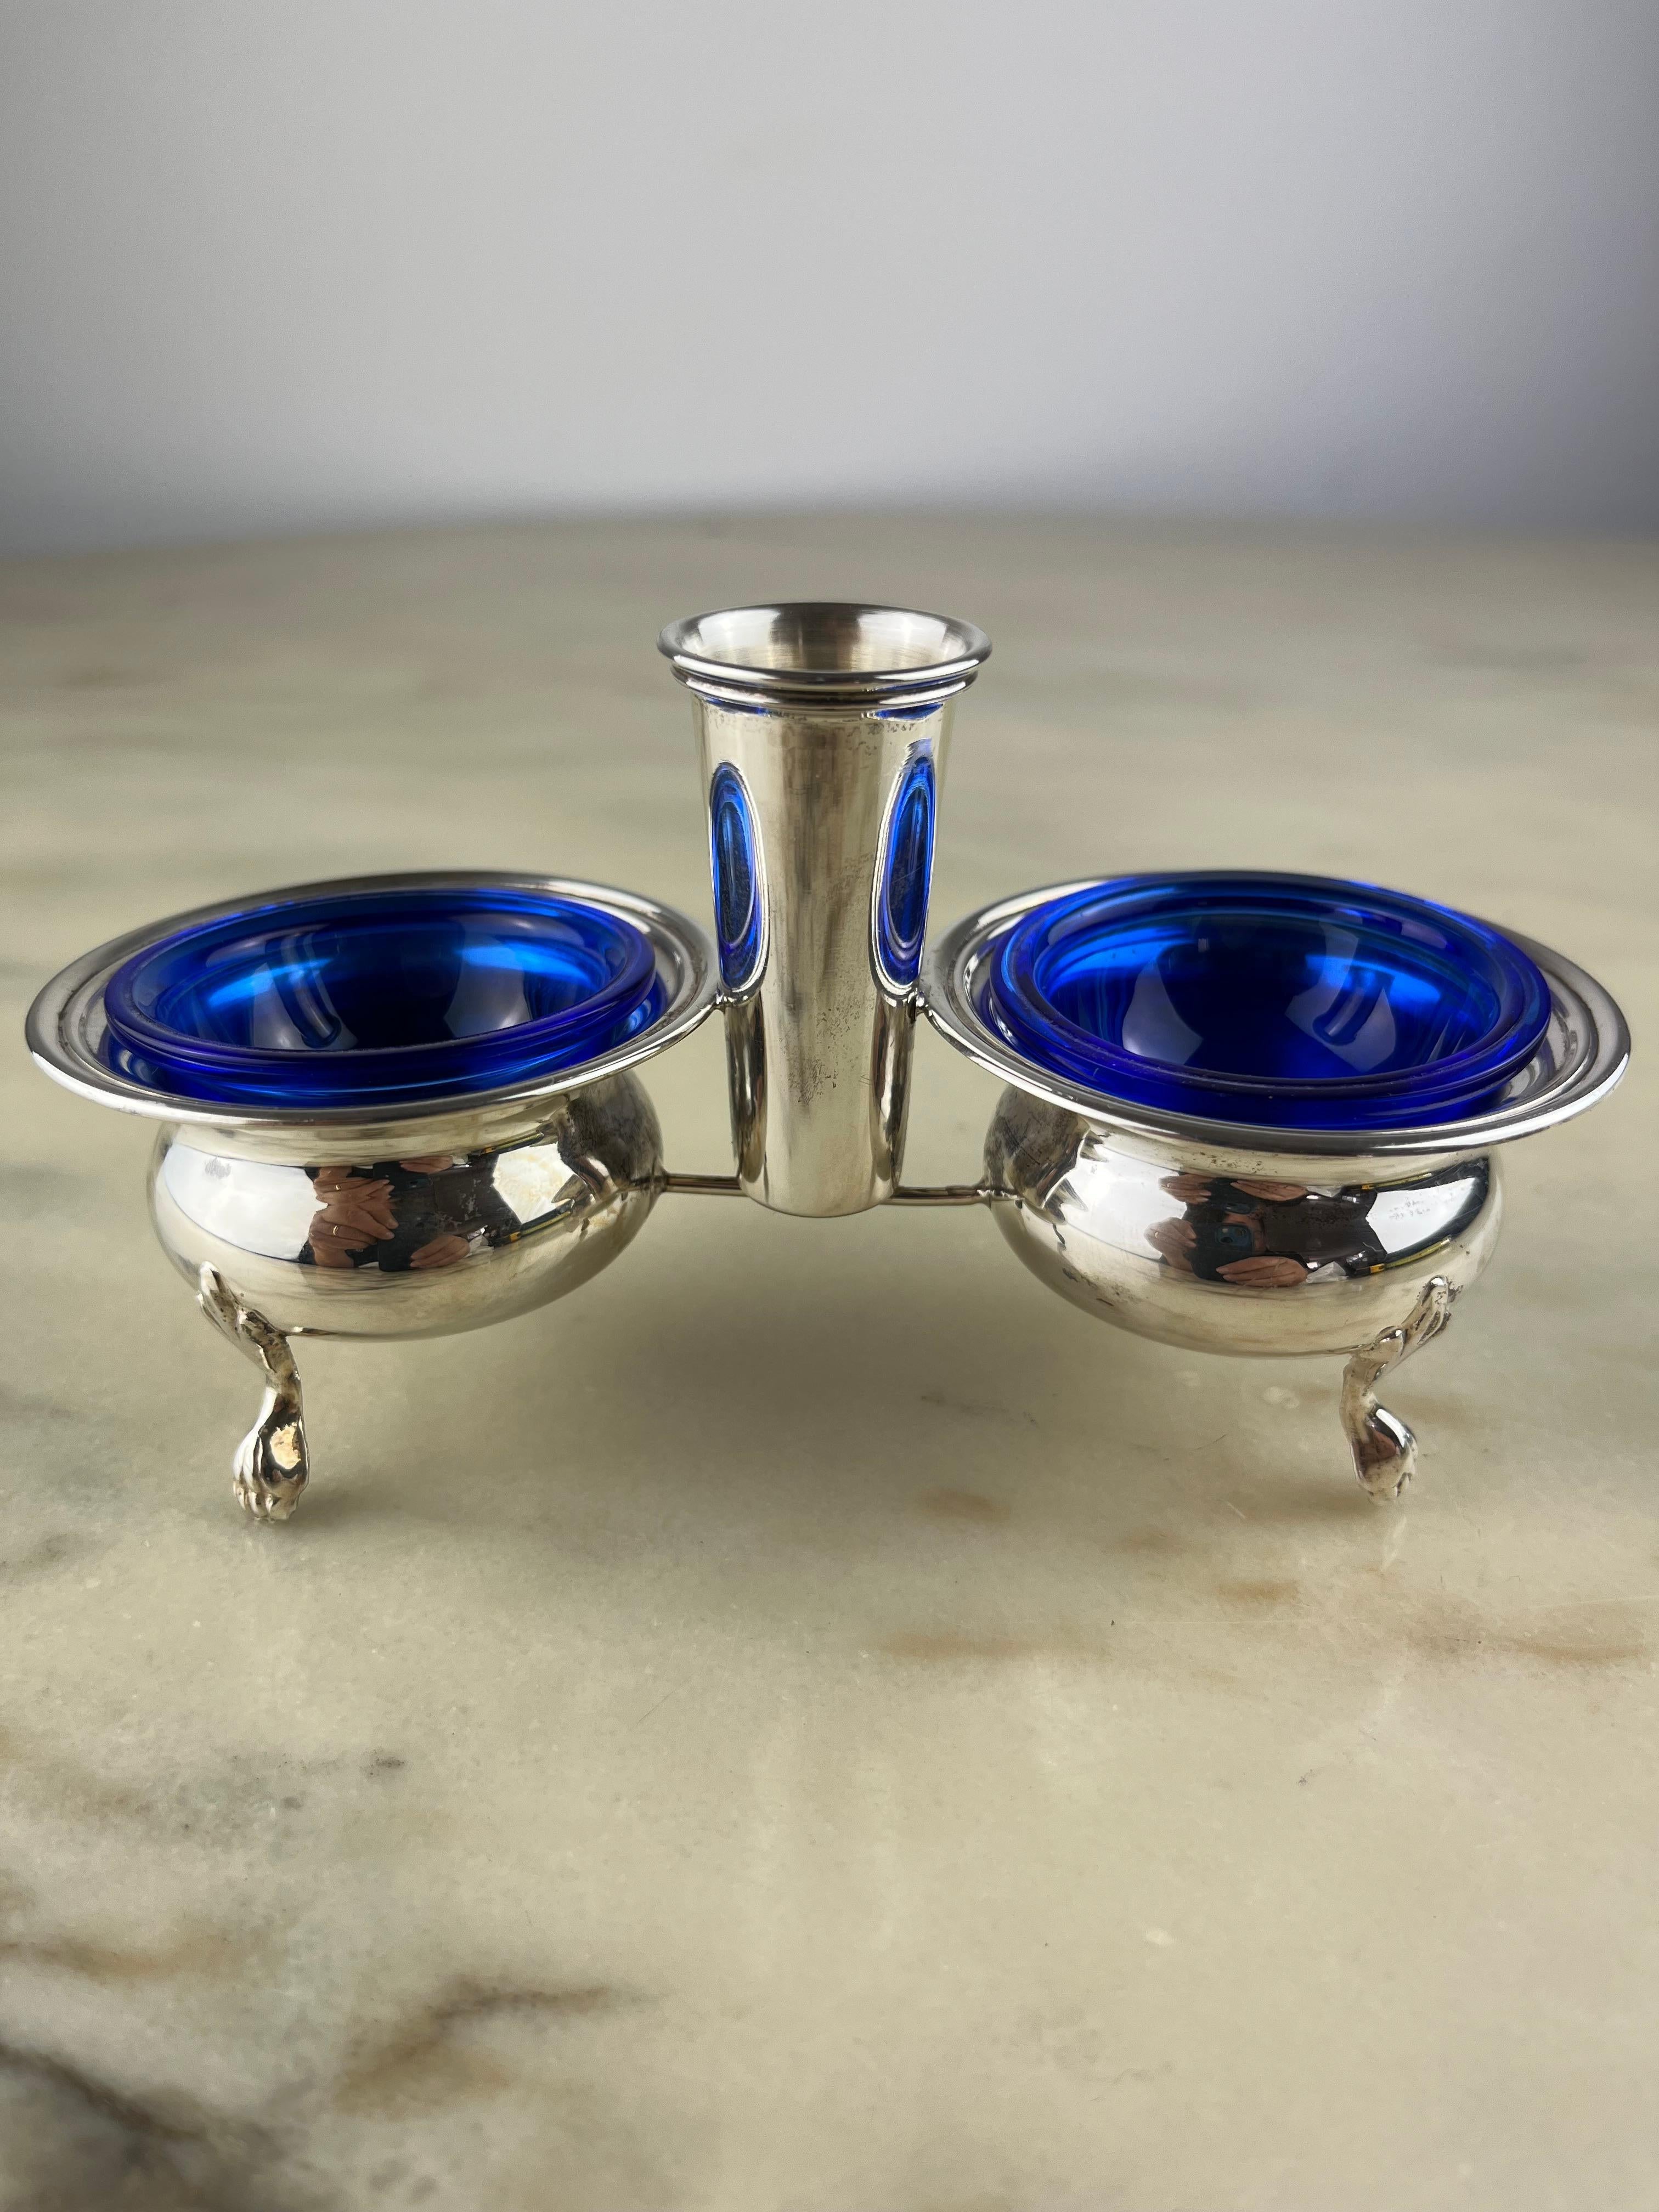 Salt/pepper/toothpick set in 800 silver and crystal, Italy, 1990
Intact, never used. Small signs of ageing.
Regularly stamped with state marks.
Found in a noble apartment.